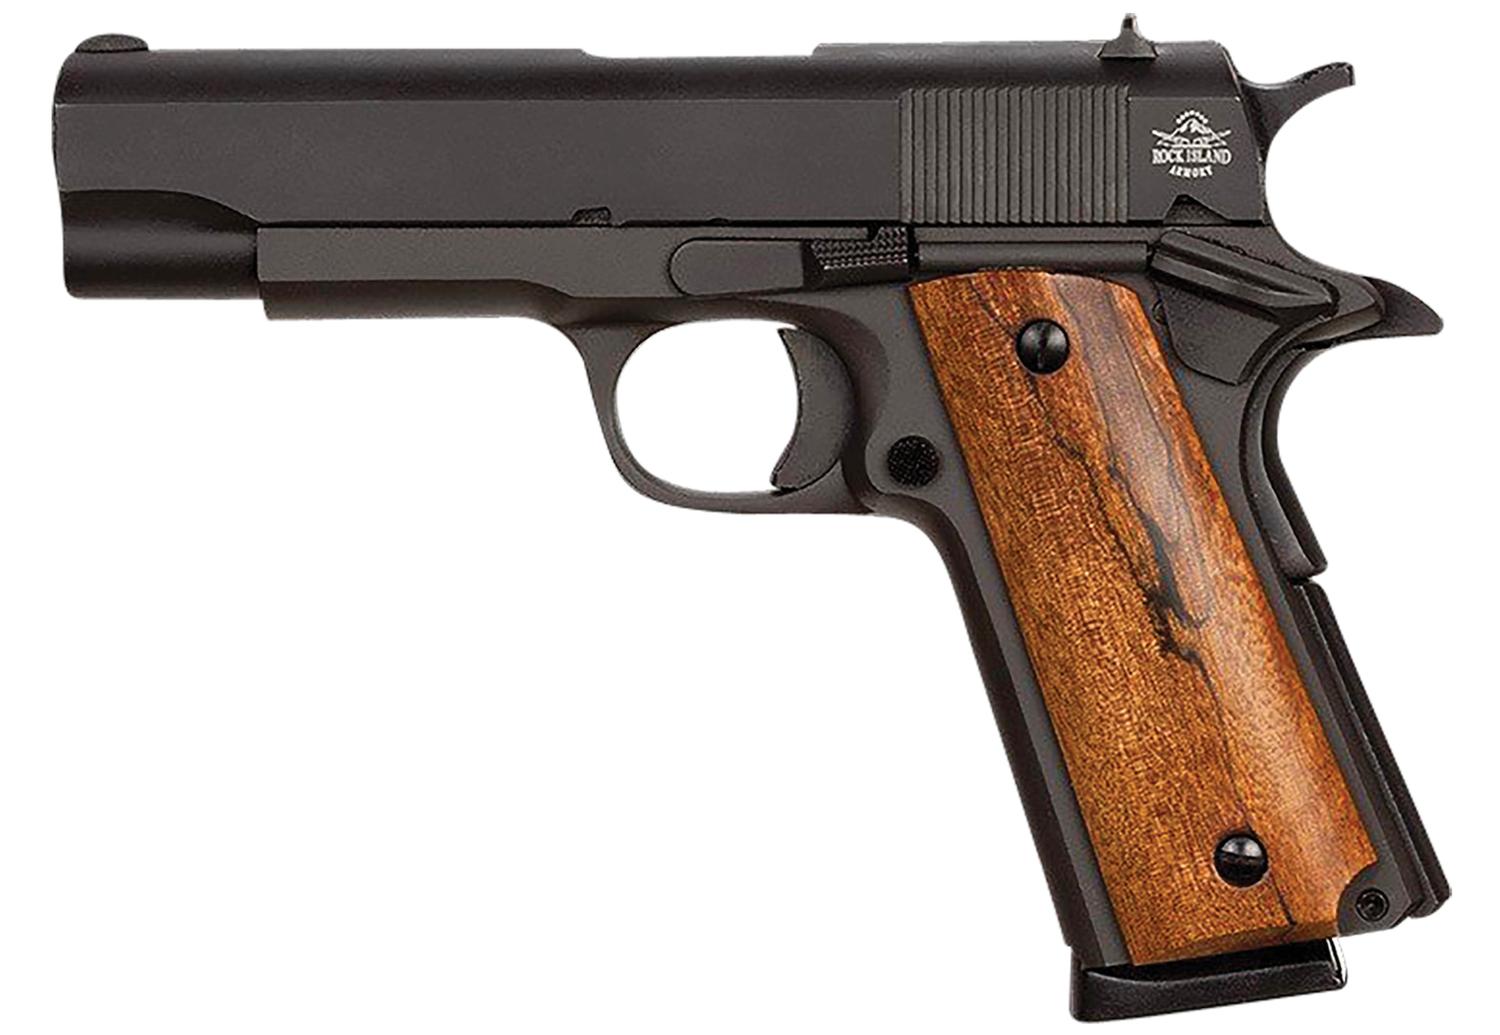  Gi 1911 Mid Size Standard 45acp 4.25in 8rd